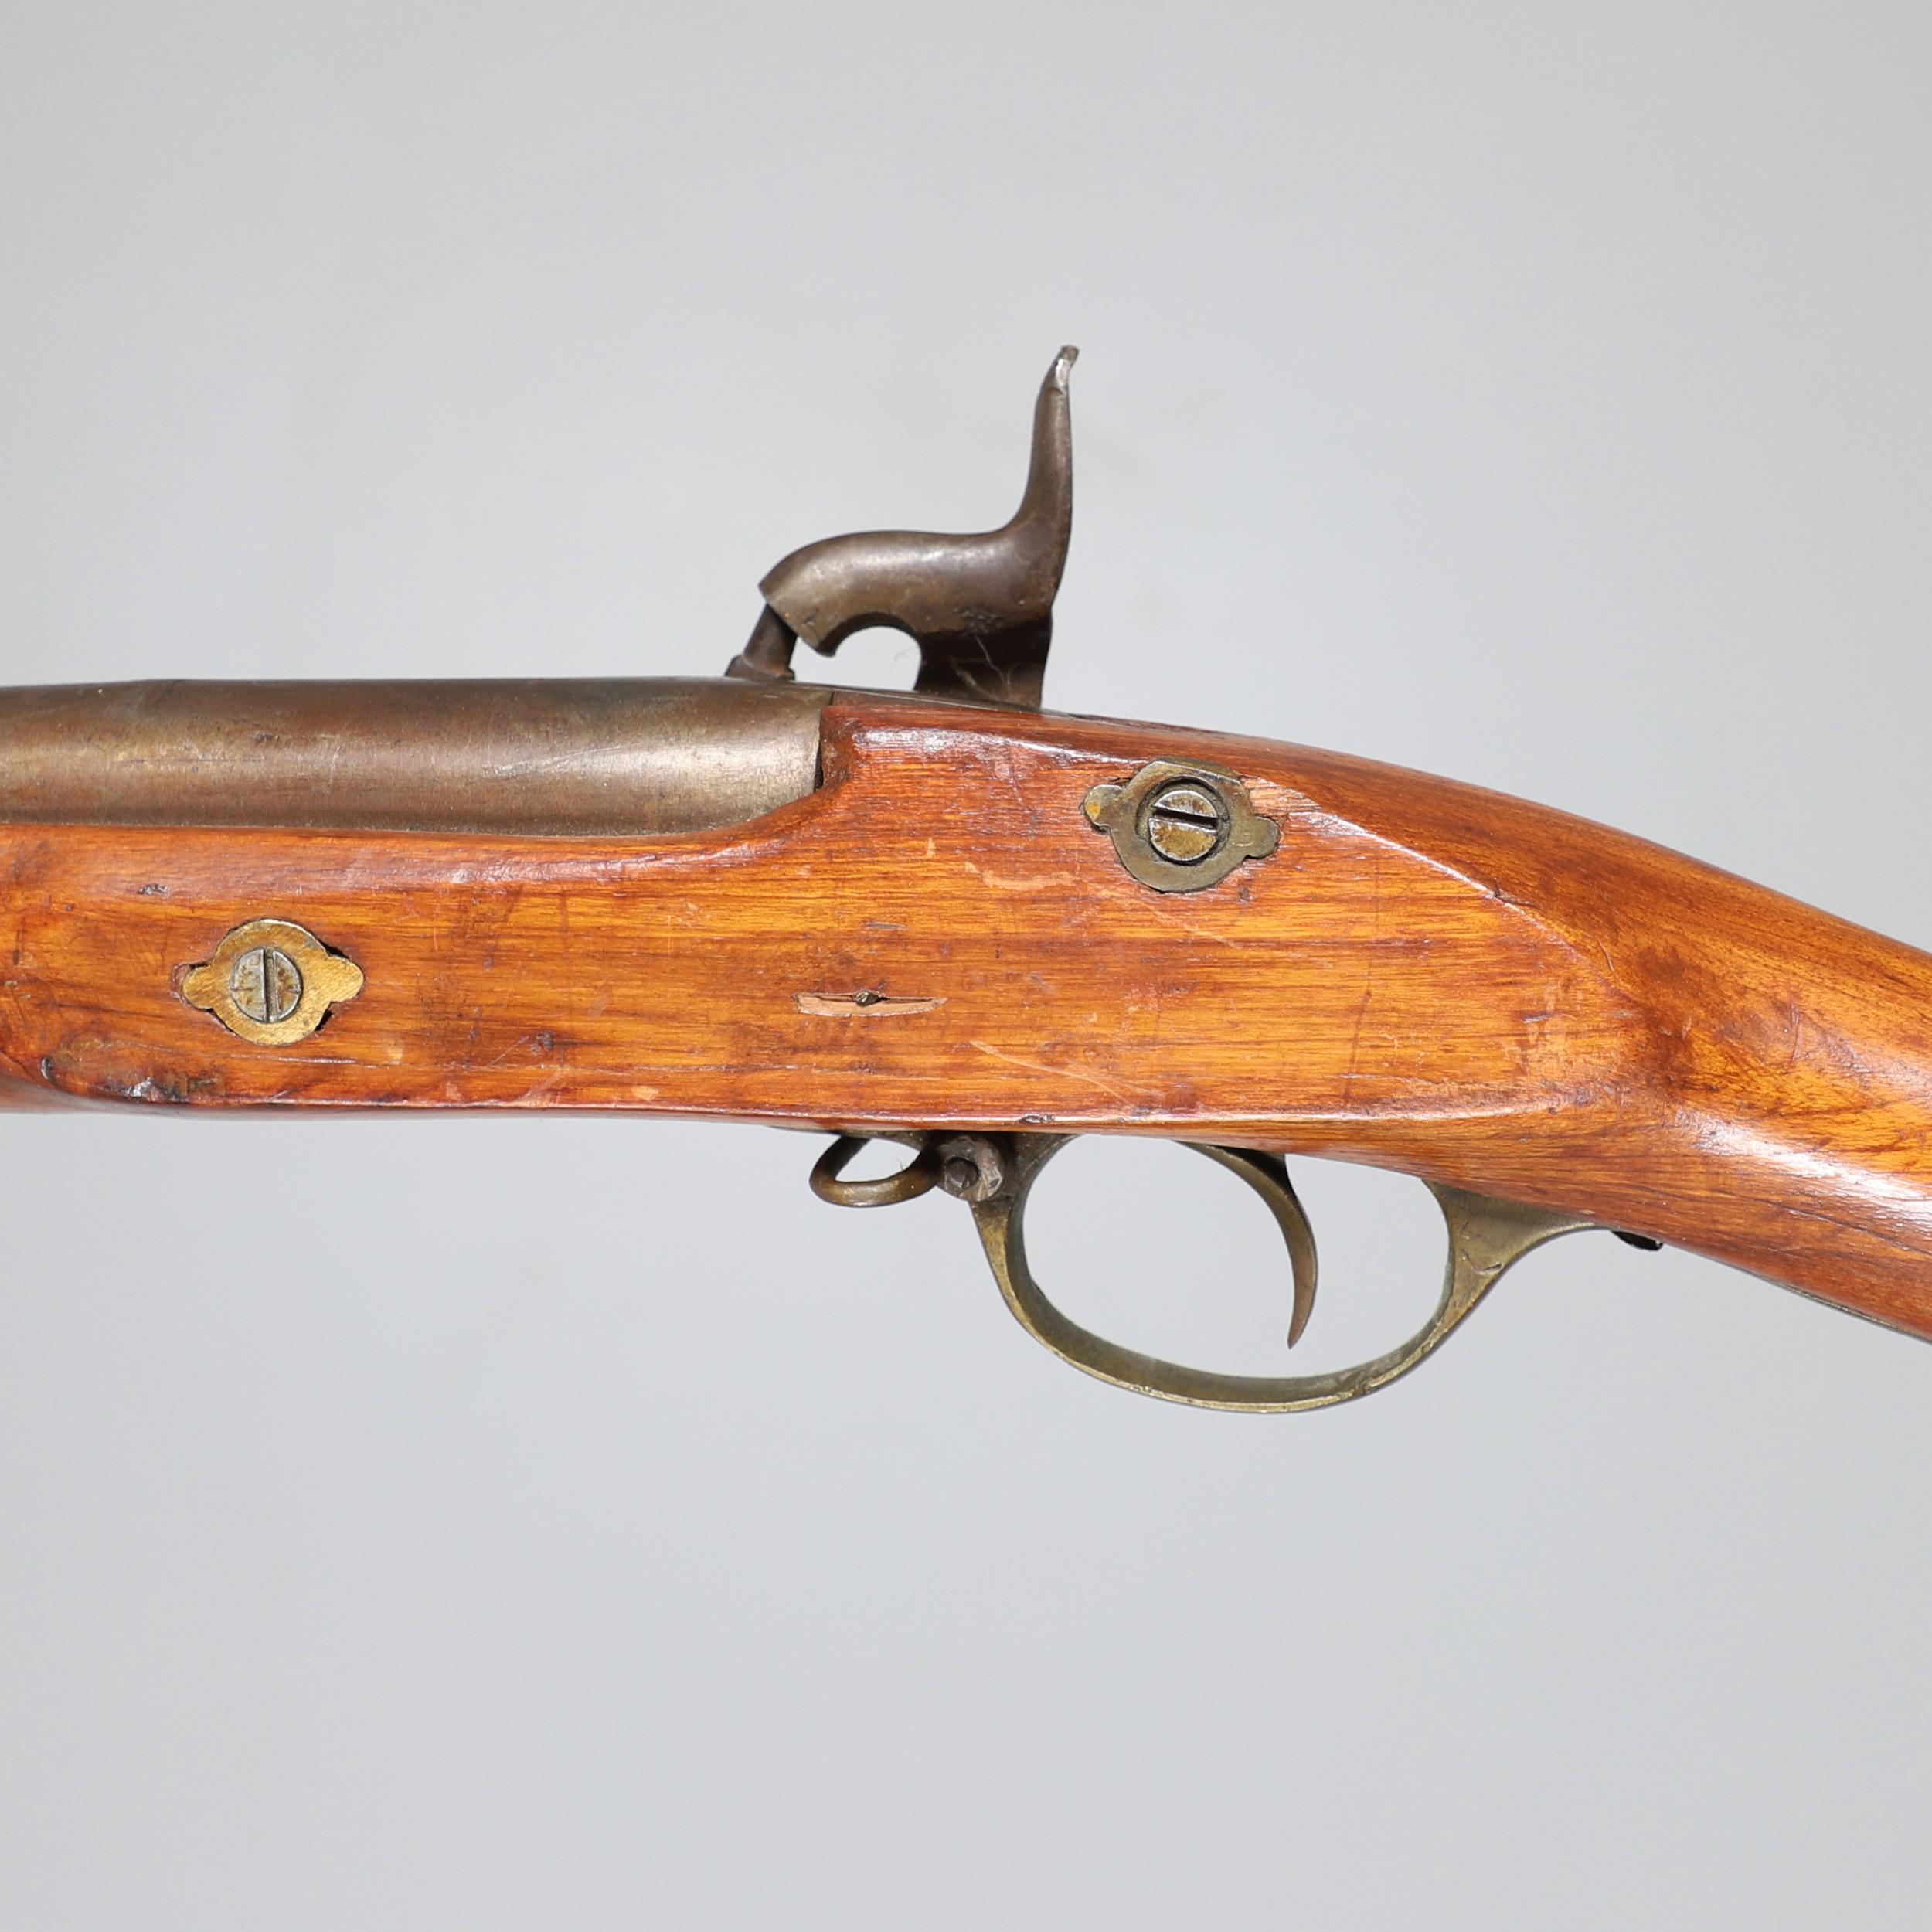 AN 1856 PATTERN PERCUSSION FIRING RIFLE. - Image 2 of 14